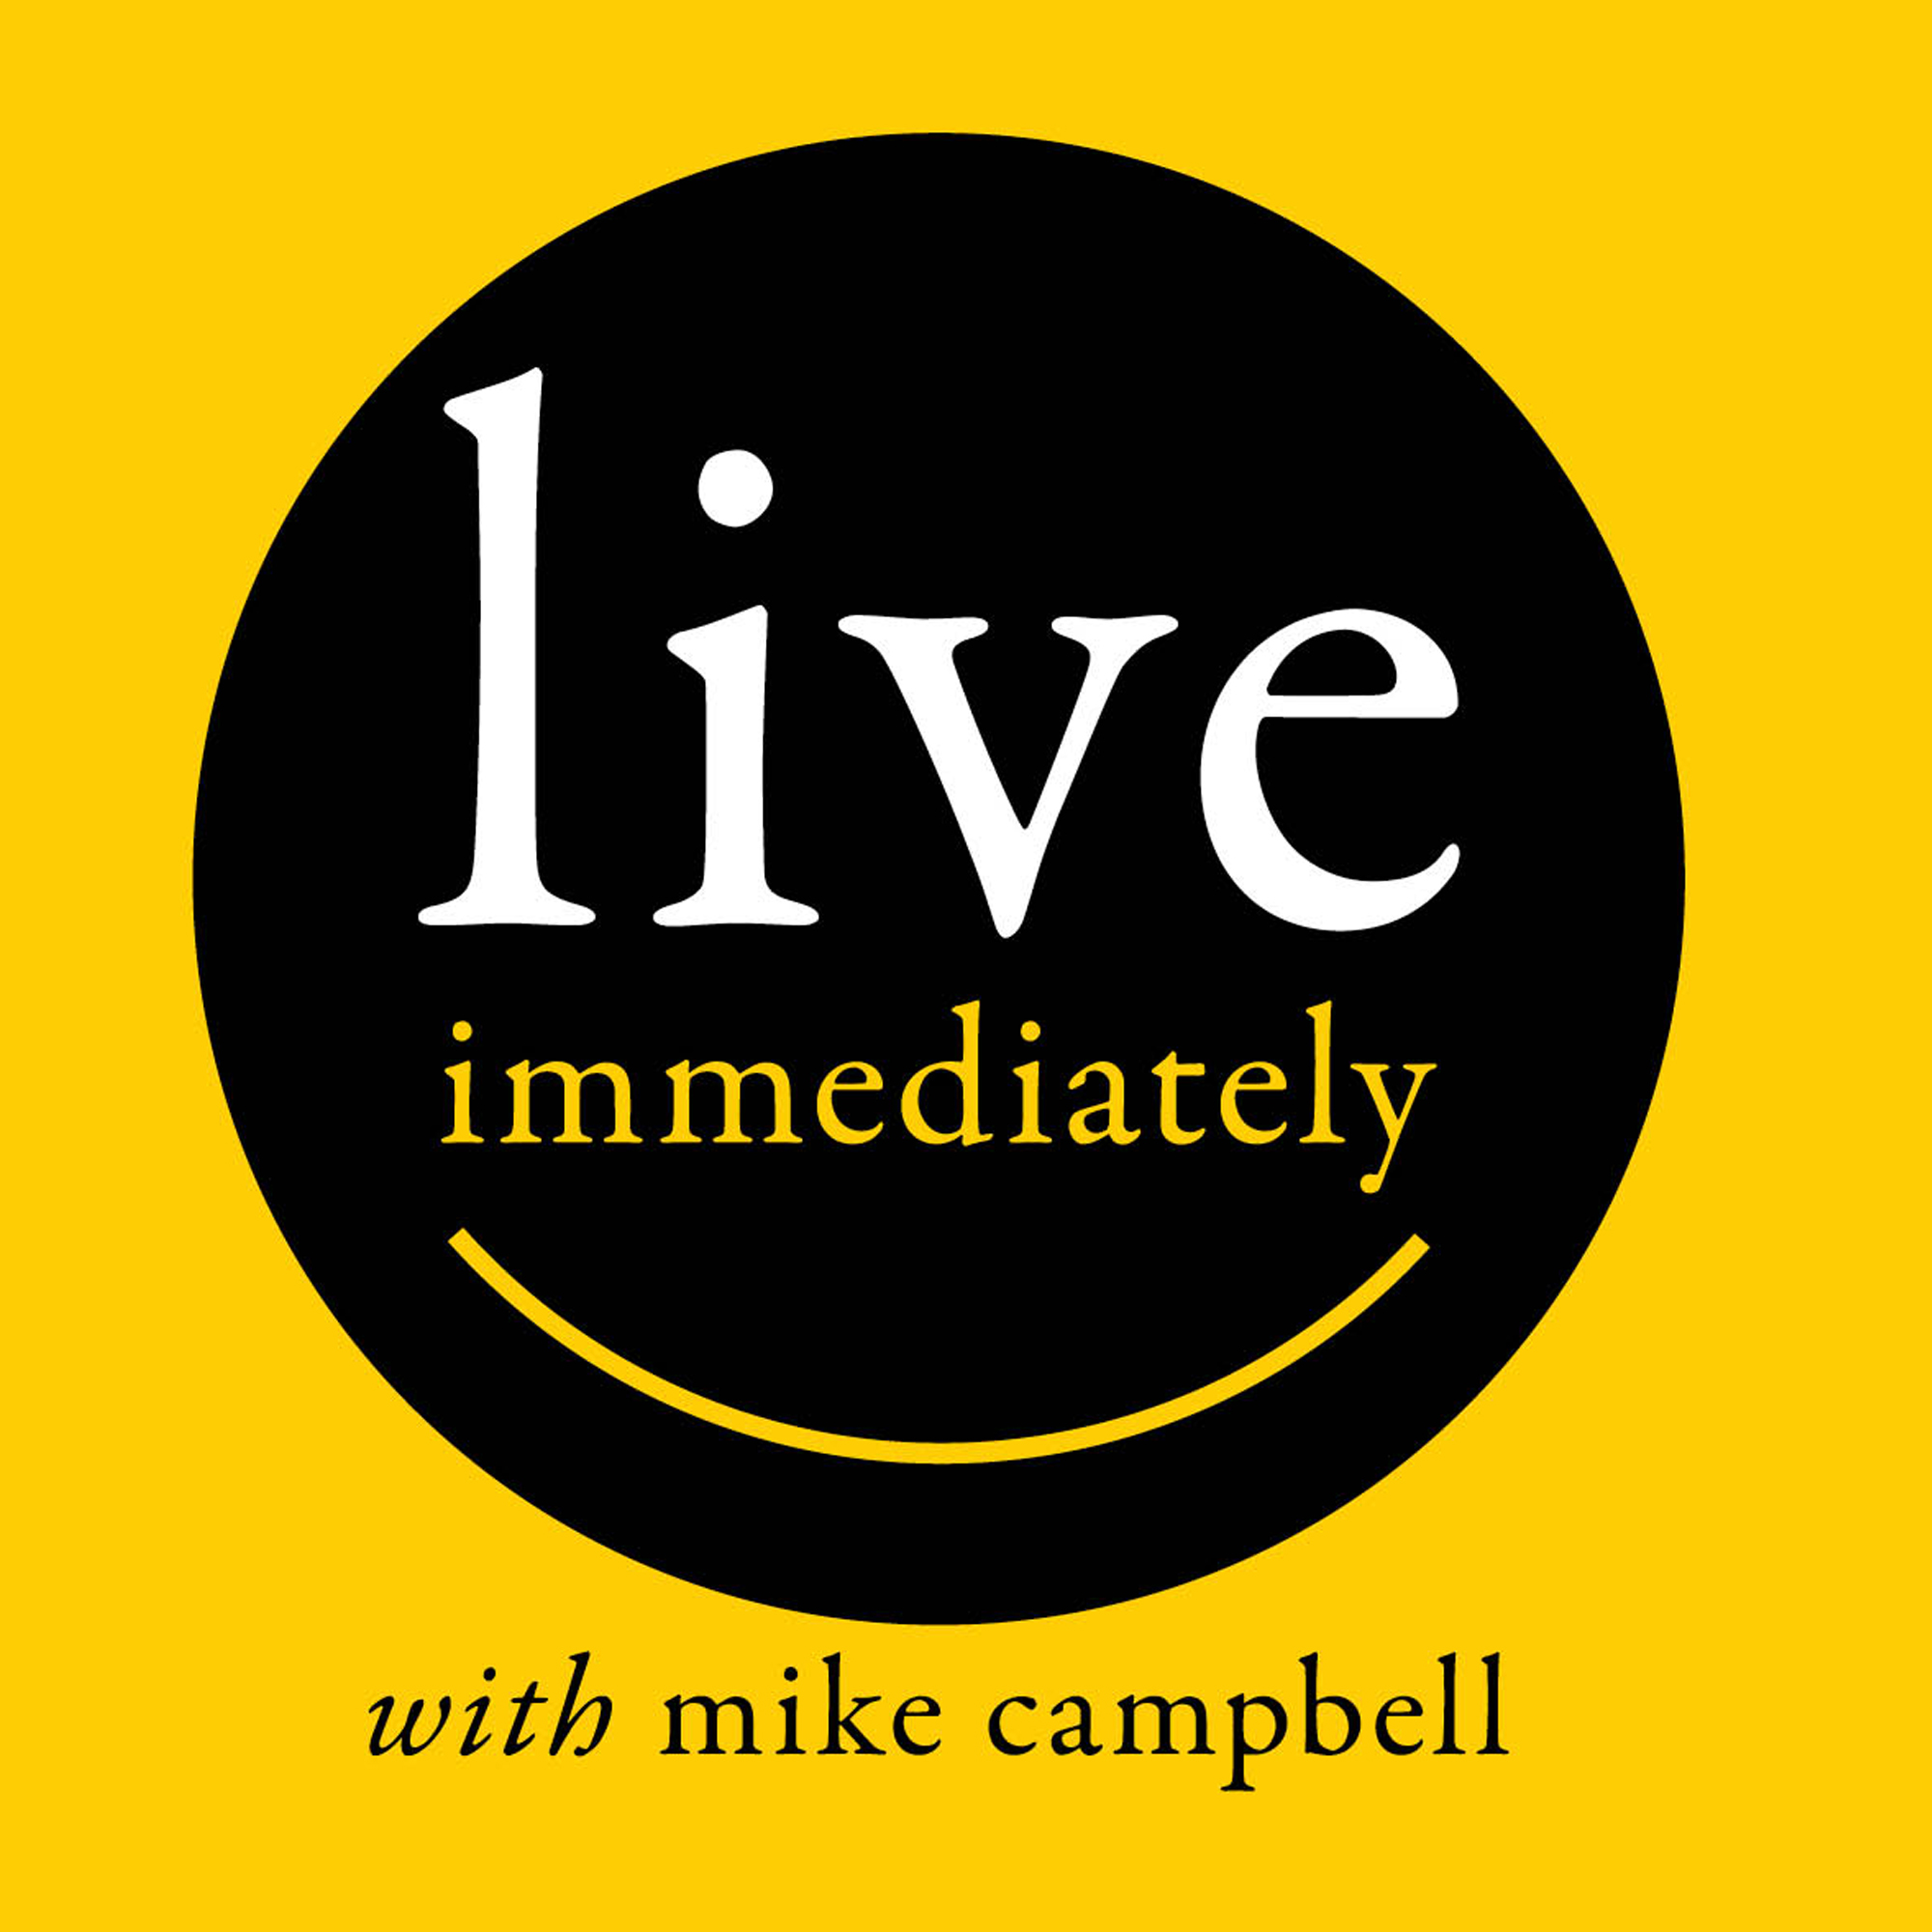 055: Brooke McAlary - SLOW - Live Life Simply